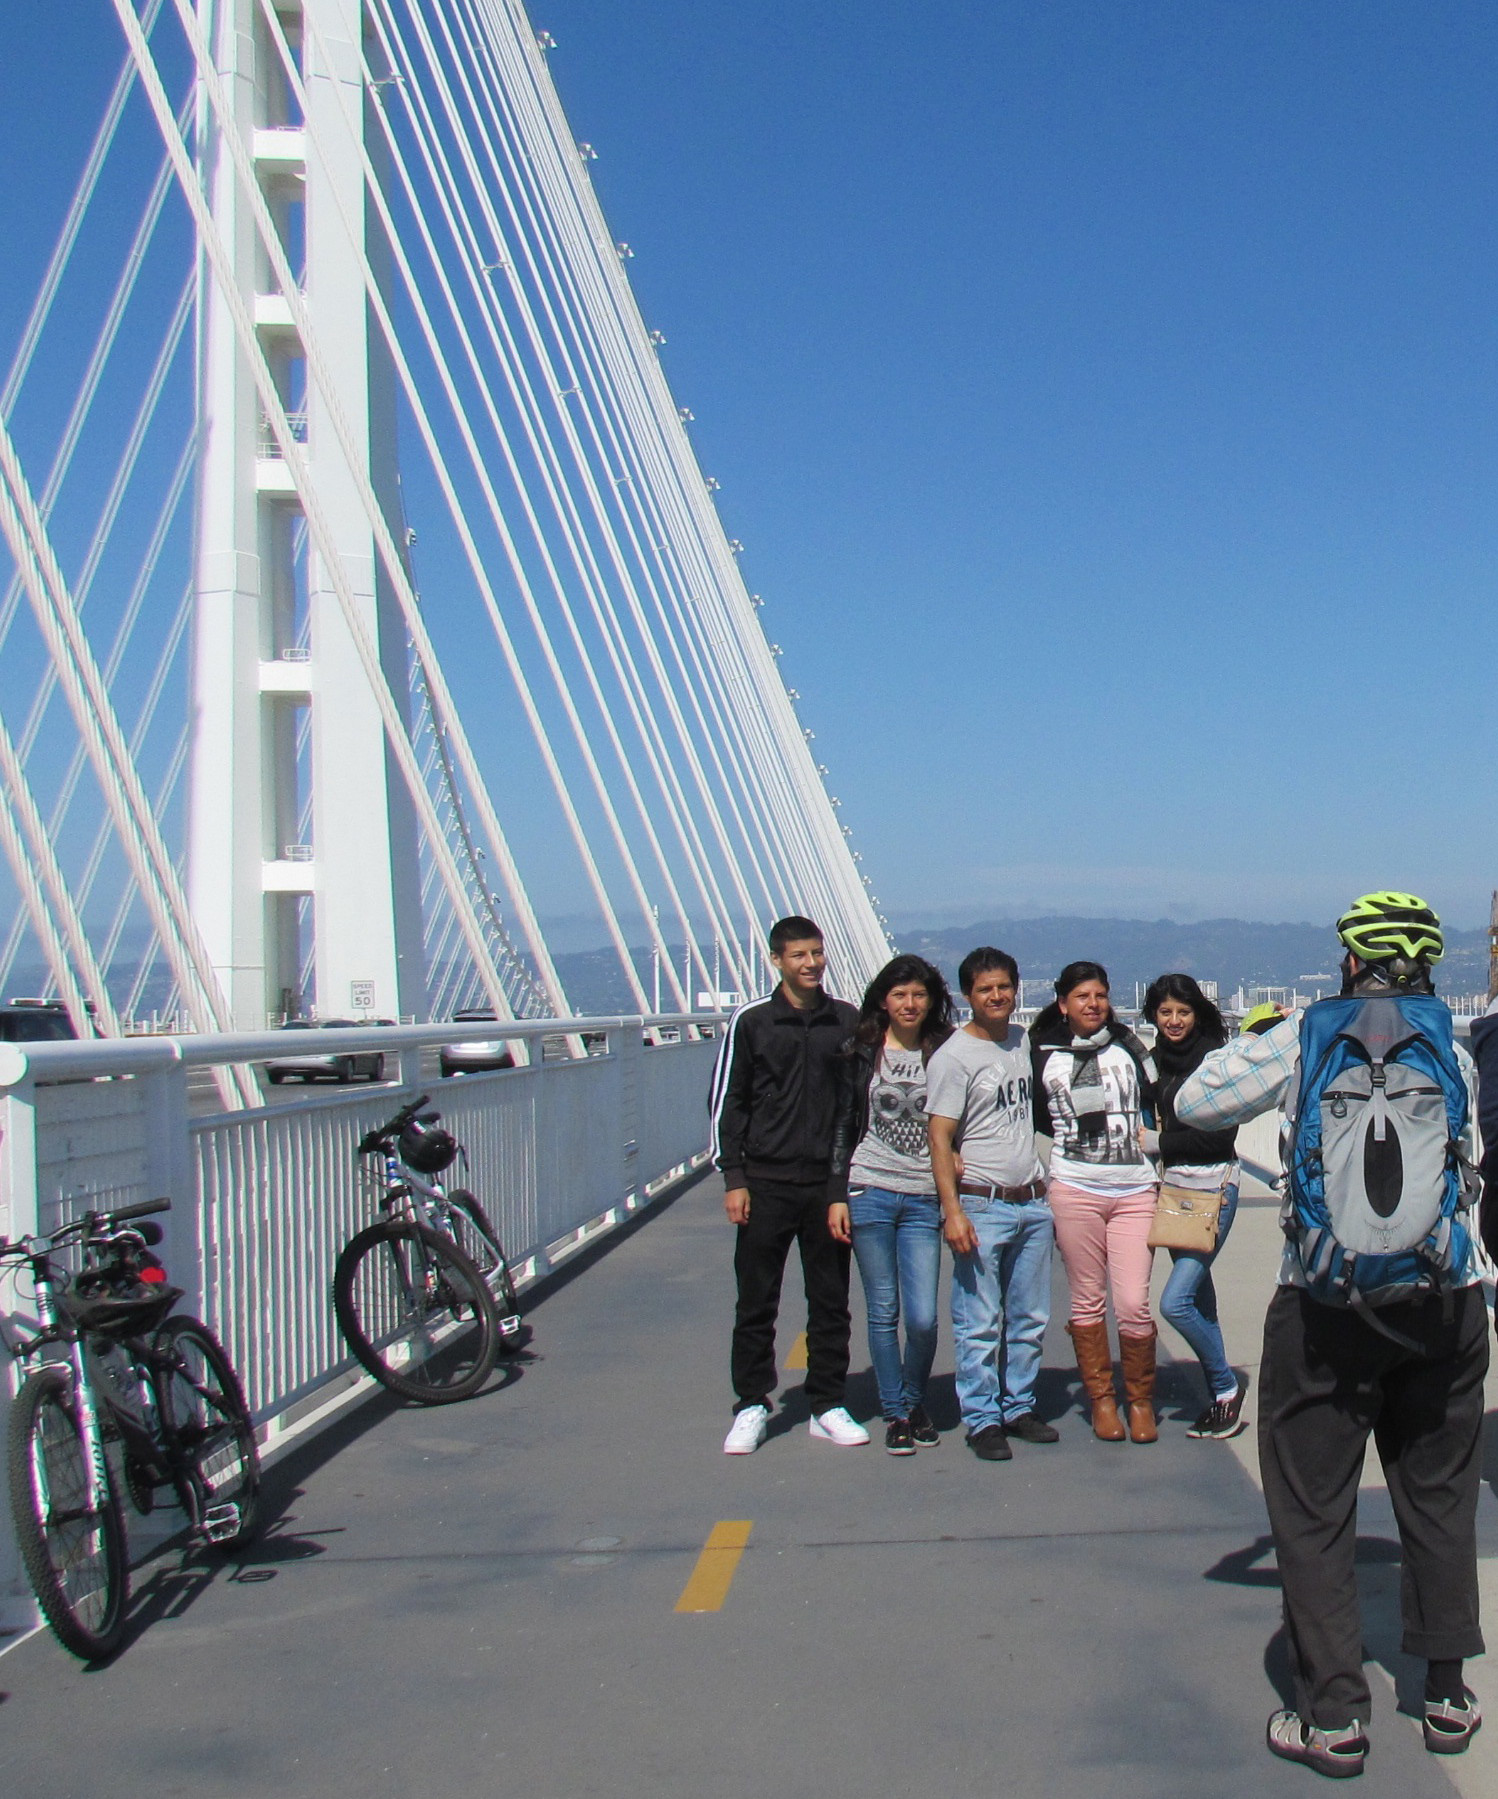 Taking pictures at the end of the Alex Zuckermann Bike Path is a popular activity. All photos: Melanie Curry